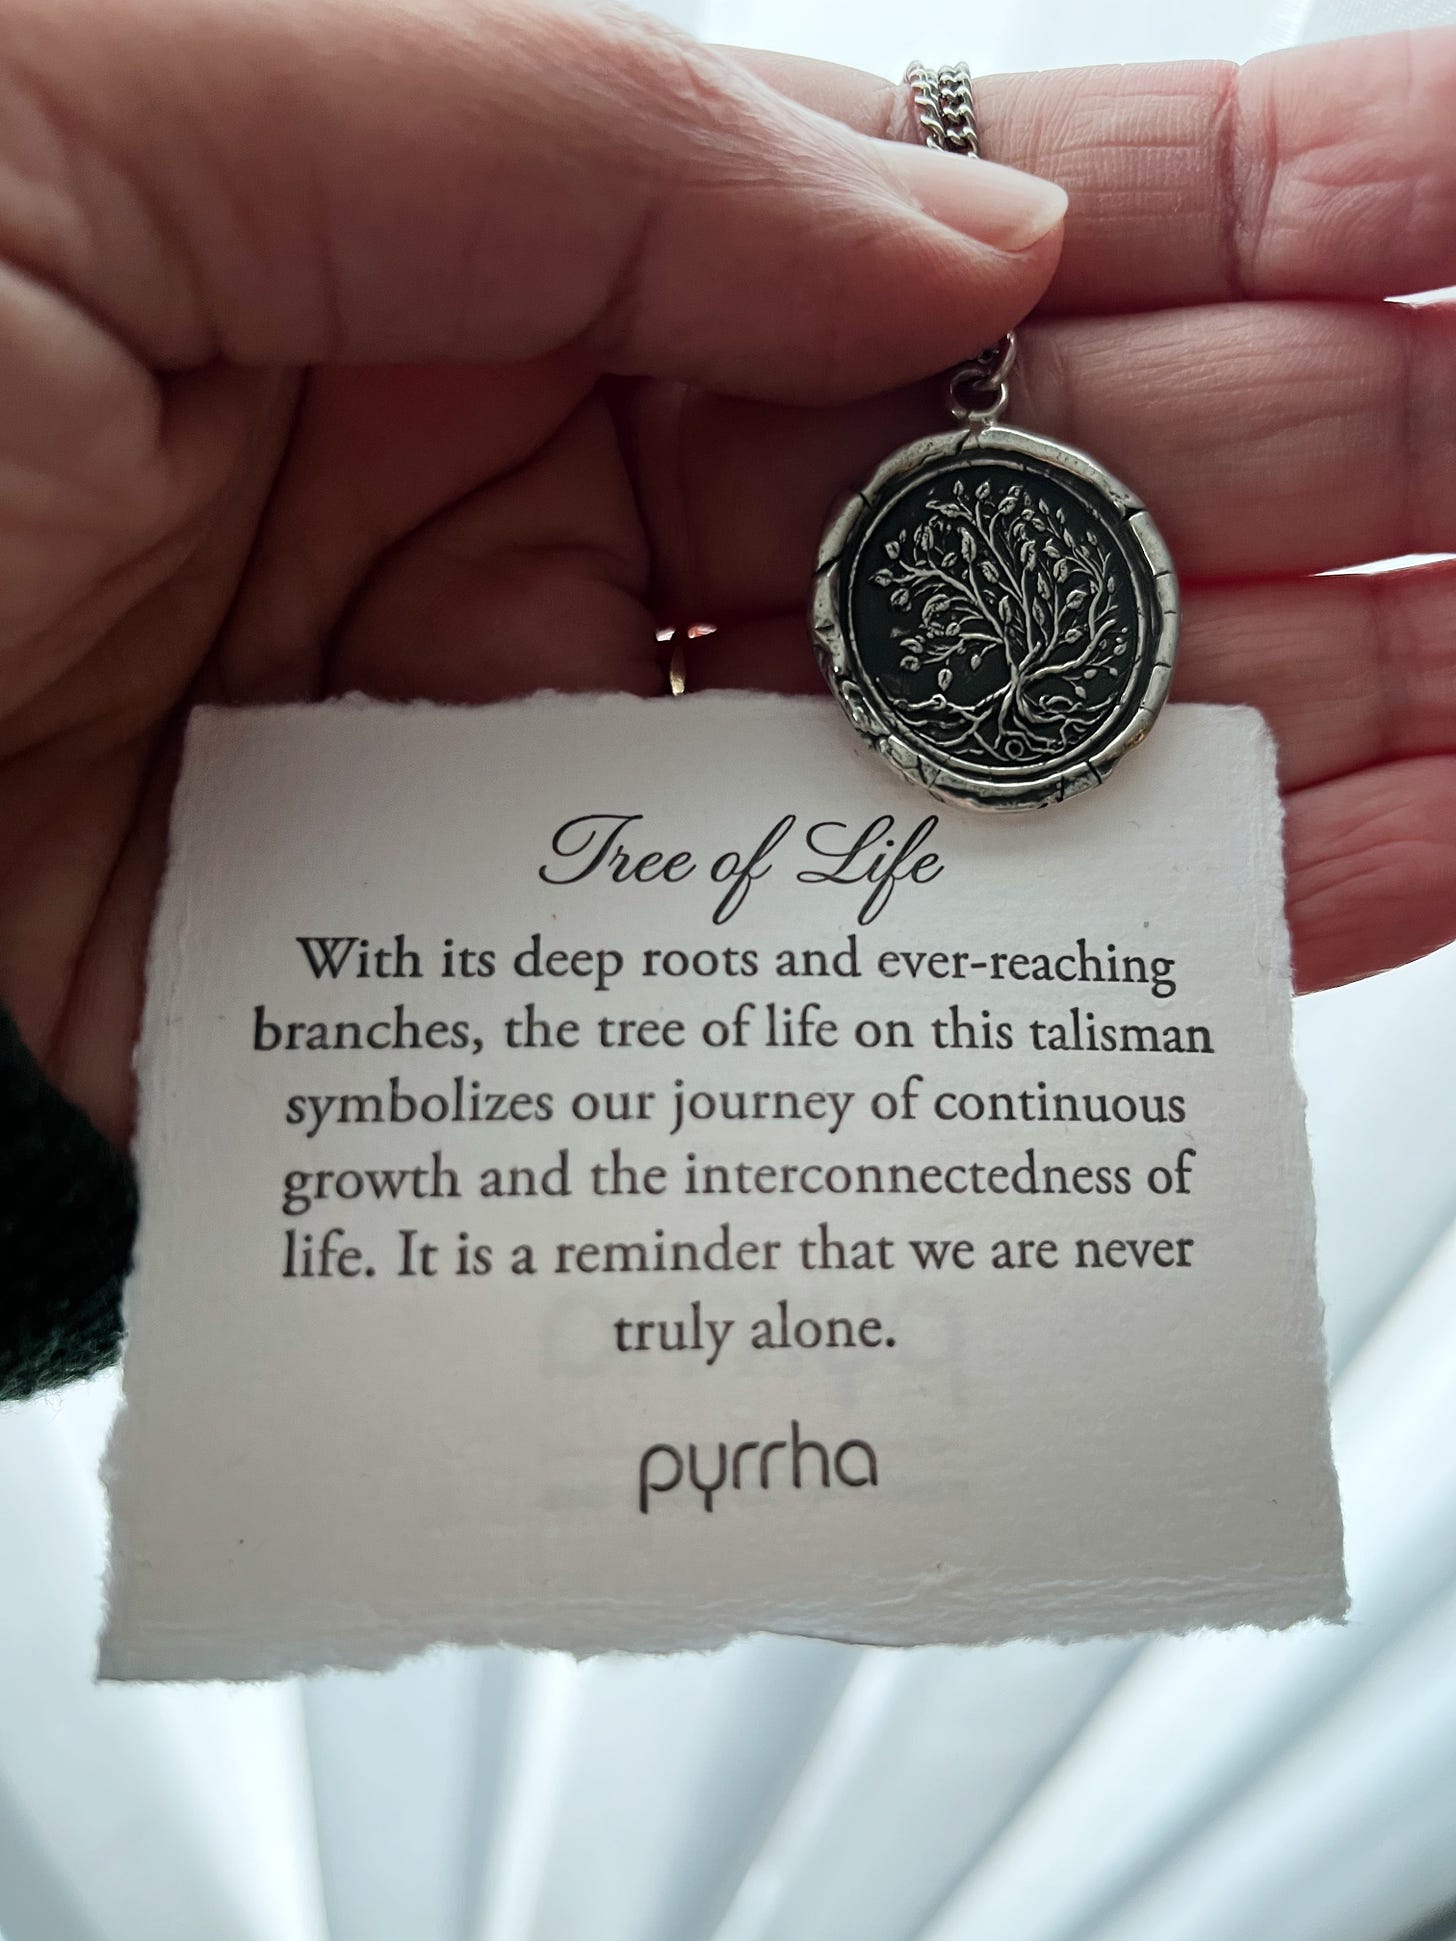 Photo of Olwen’s hand holding a Pyrrha silver pendant with an image of a tree with branches, leaves and roots on it. The white card behind it reads: “Tree of Life. With its deep roots and ever-reaching branches, the tree of life on this talisman symbolizes our journey of continuous growth and interconnectedness of life. It is a reminder that we are never truly alone.”